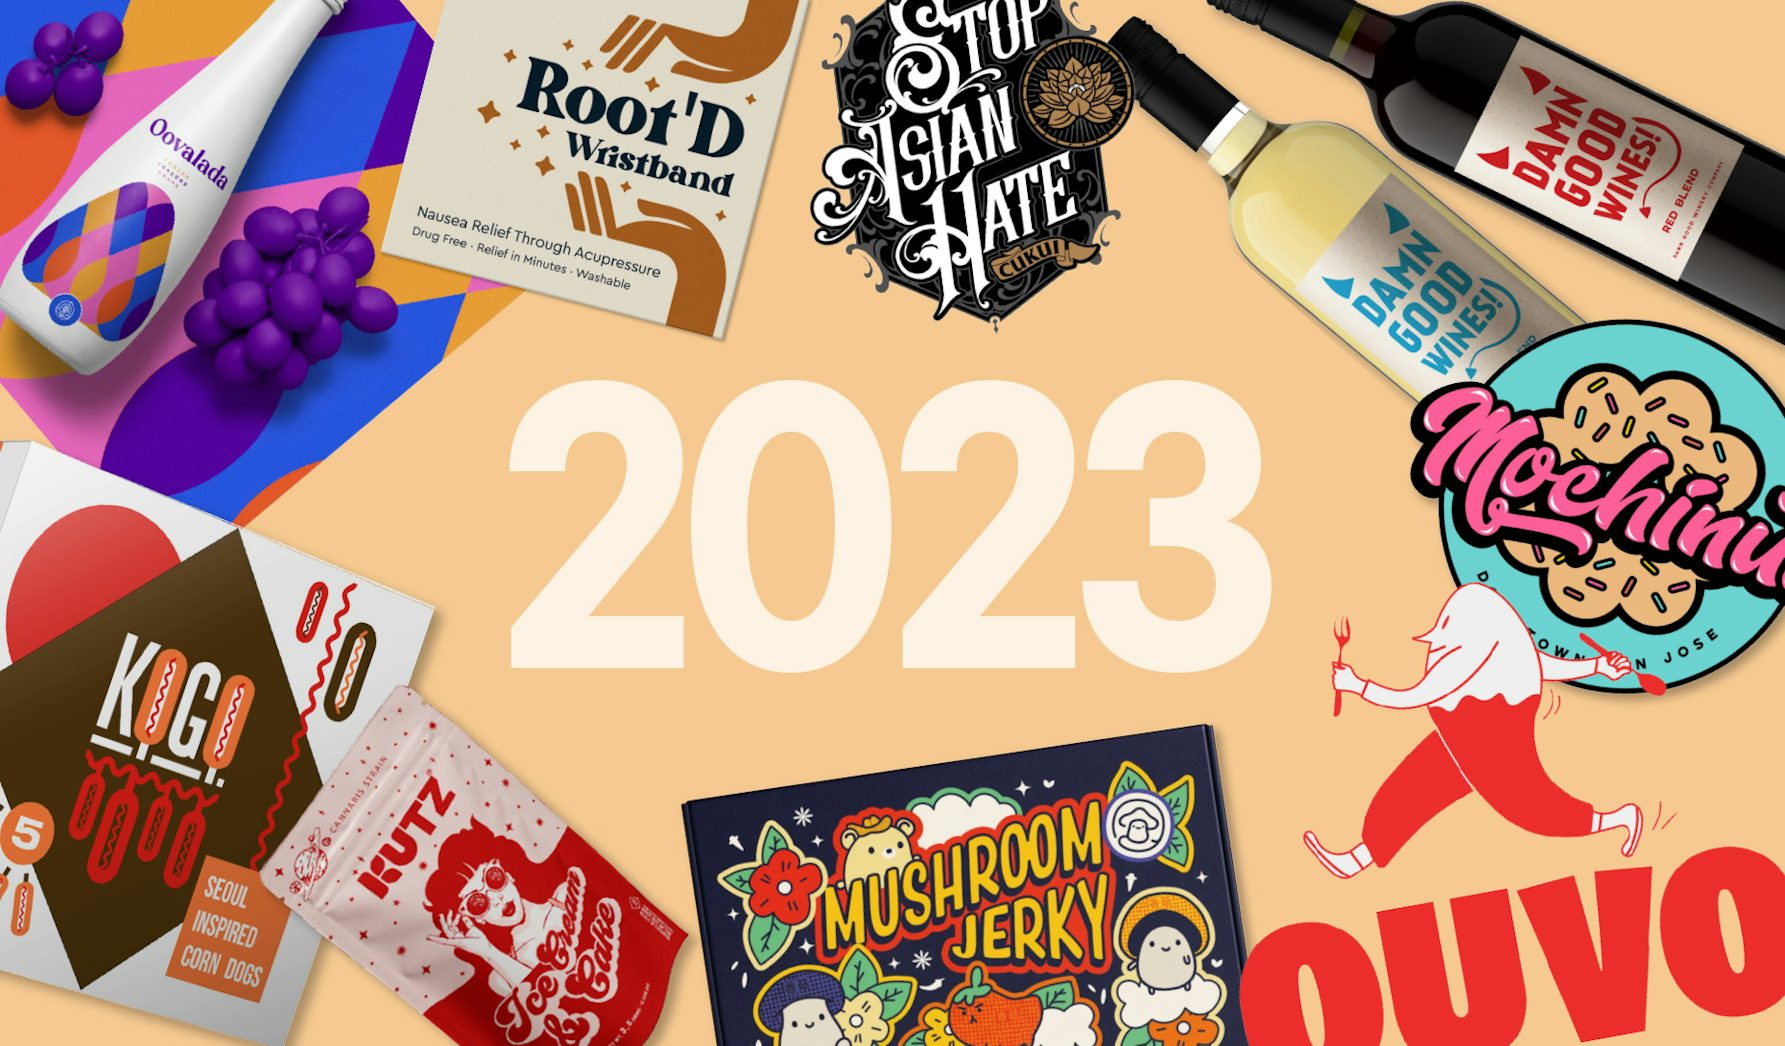 34 Ways To Grow Your Fashion Brand In 2023 - Desinder - Creative Agency